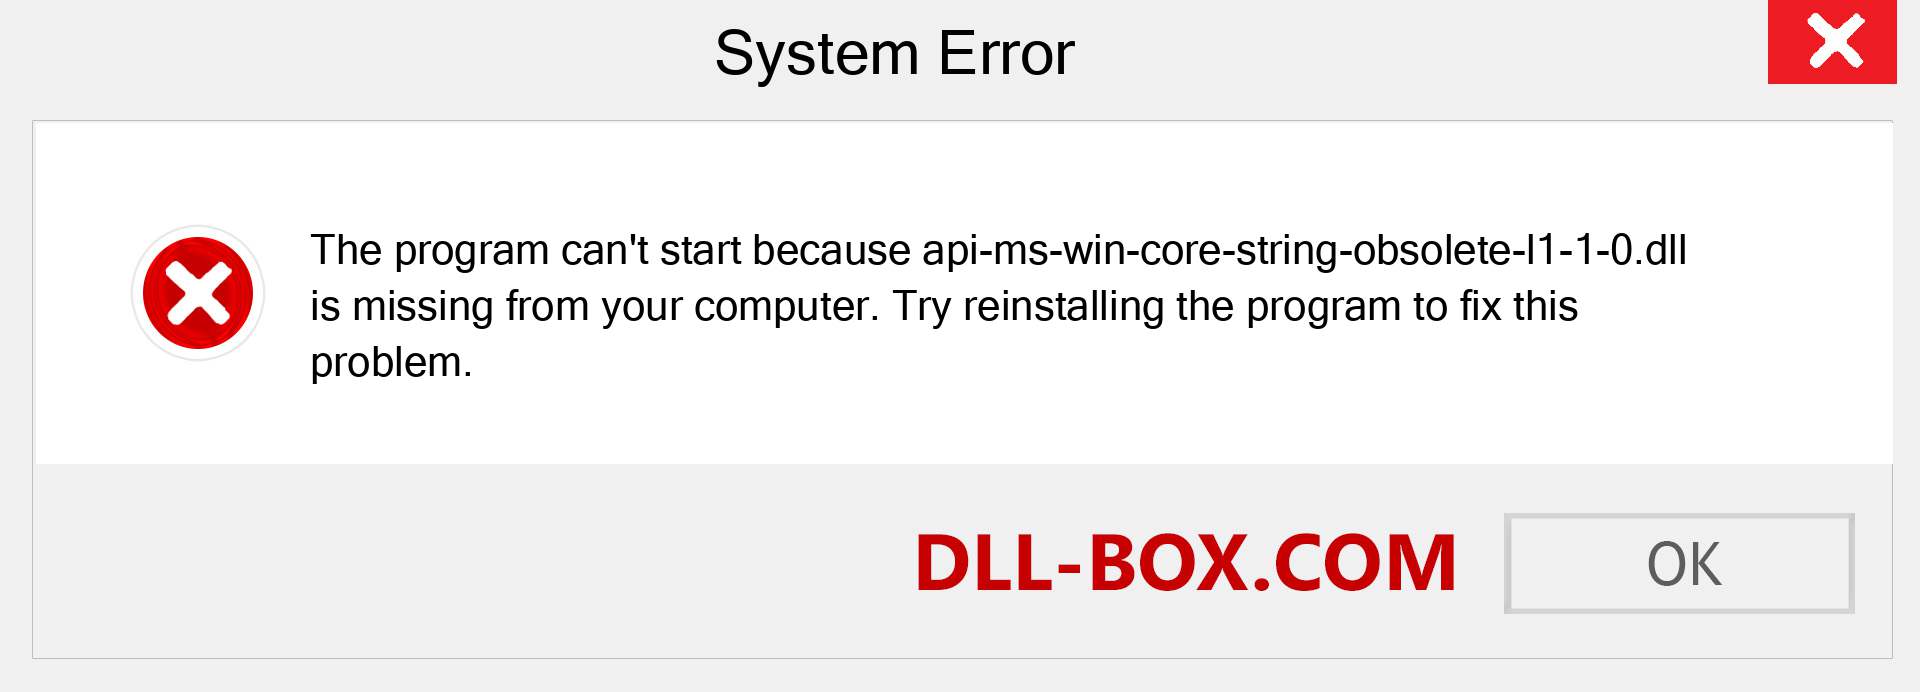  api-ms-win-core-string-obsolete-l1-1-0.dll file is missing?. Download for Windows 7, 8, 10 - Fix  api-ms-win-core-string-obsolete-l1-1-0 dll Missing Error on Windows, photos, images